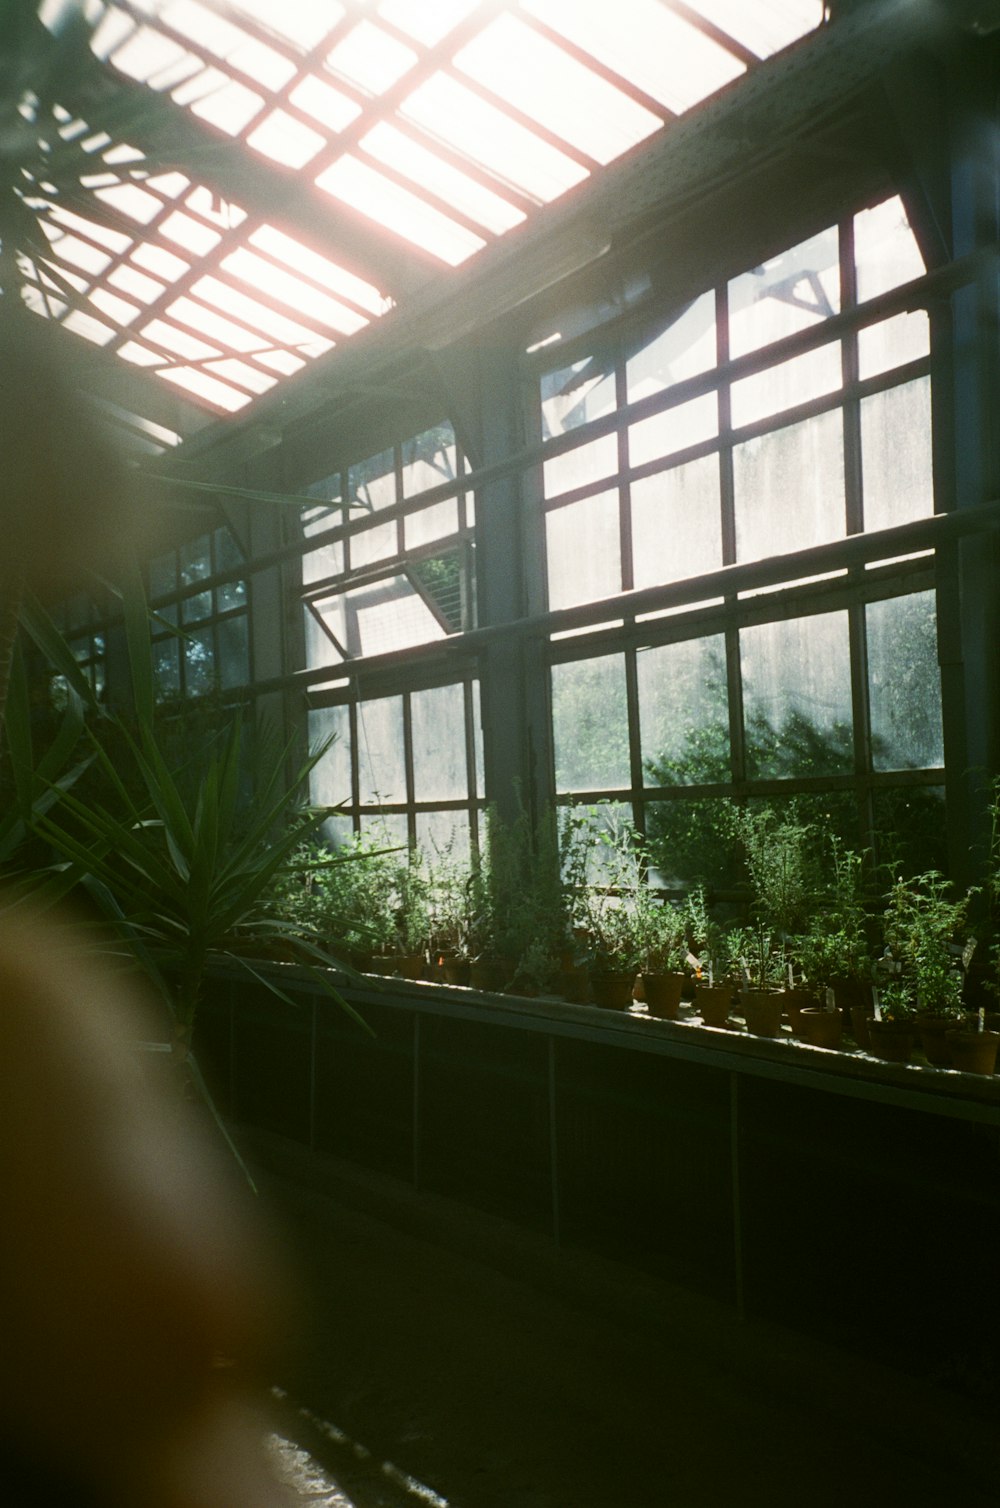 a greenhouse filled with lots of green plants